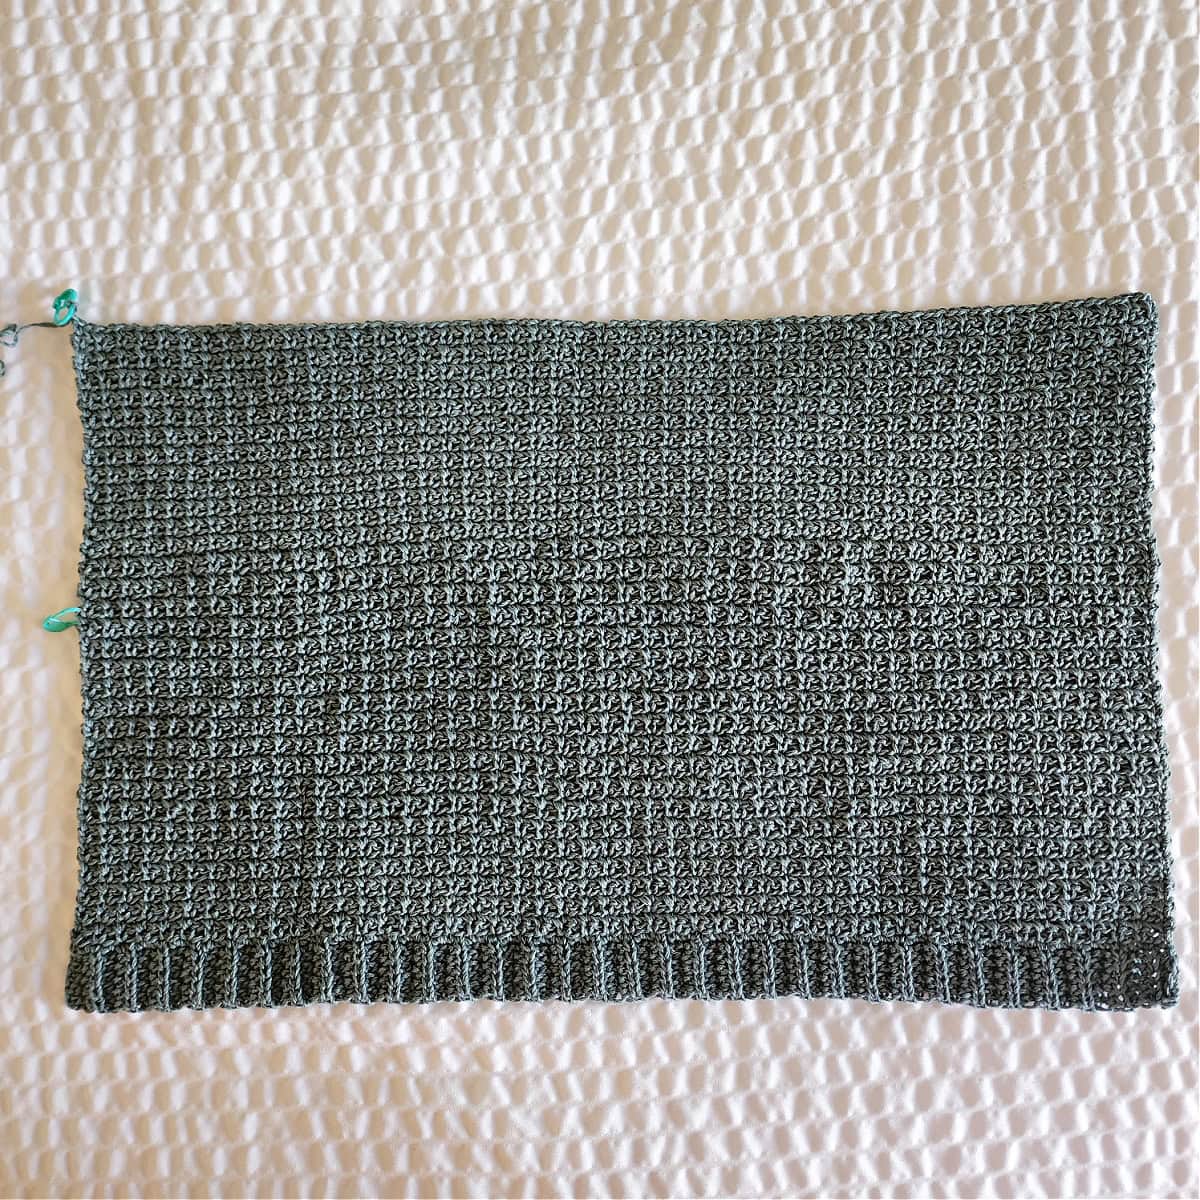 The beginning of a panel of the crochet summer top.